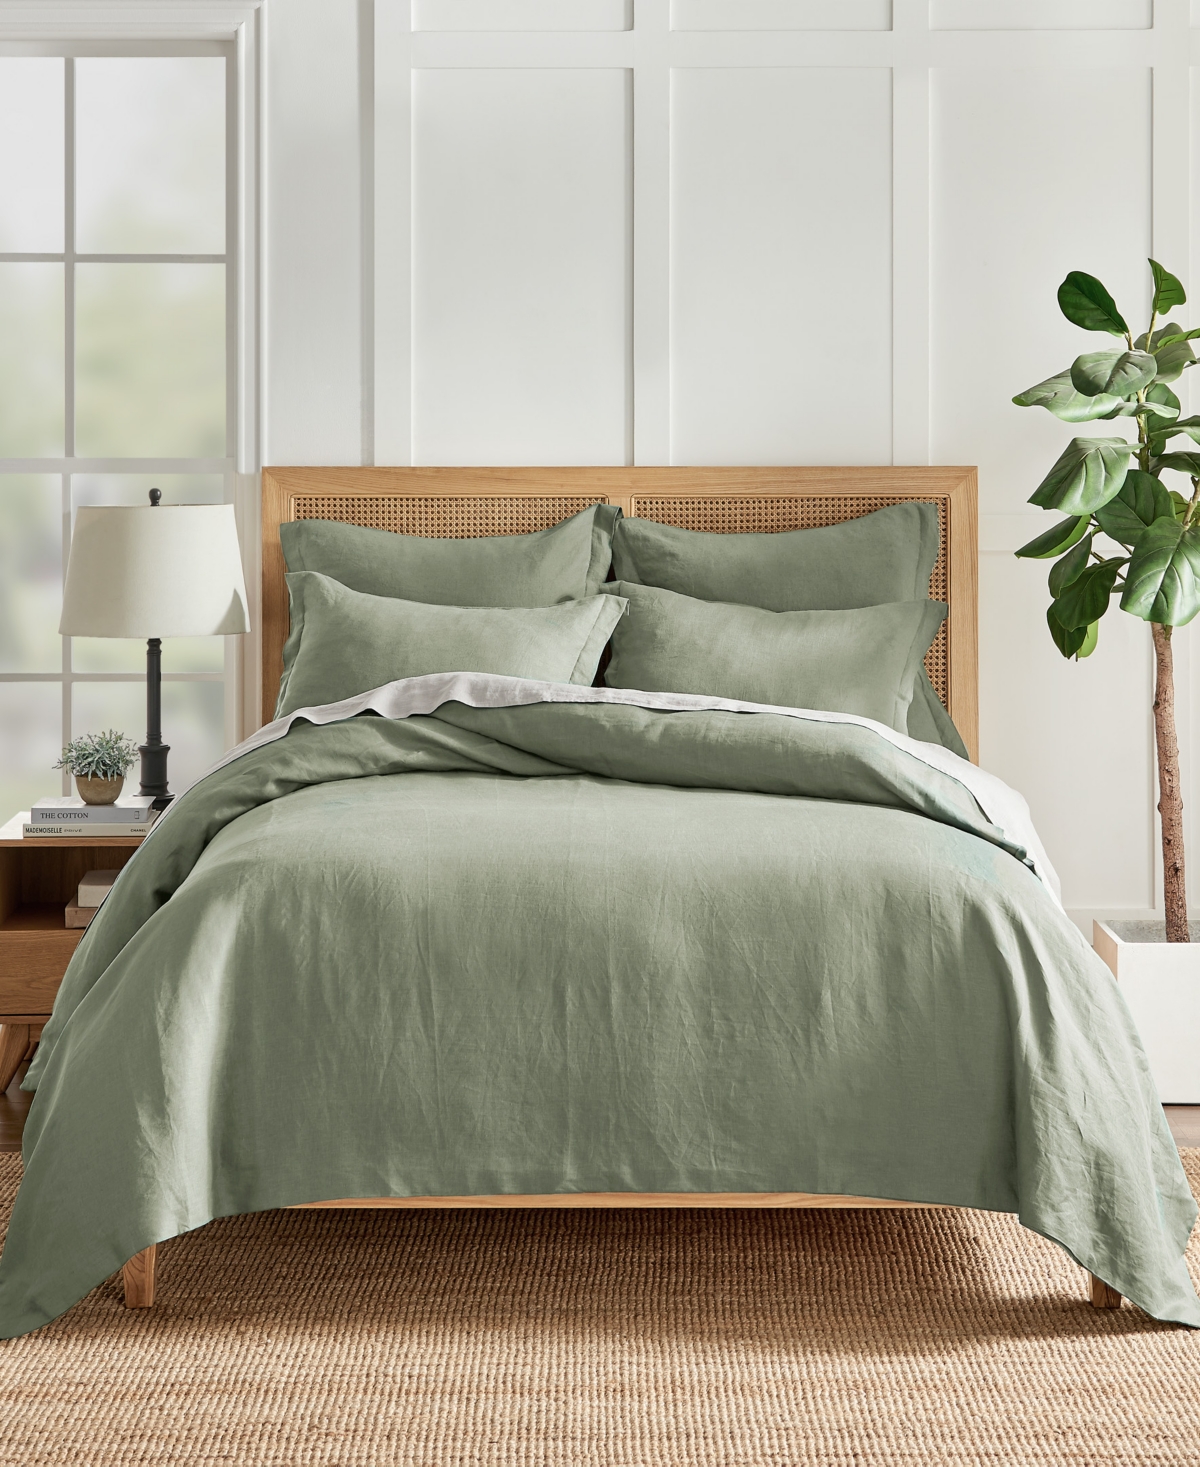 Levtex Washed Linen Solid Duvet Cover, King/california King In Blue